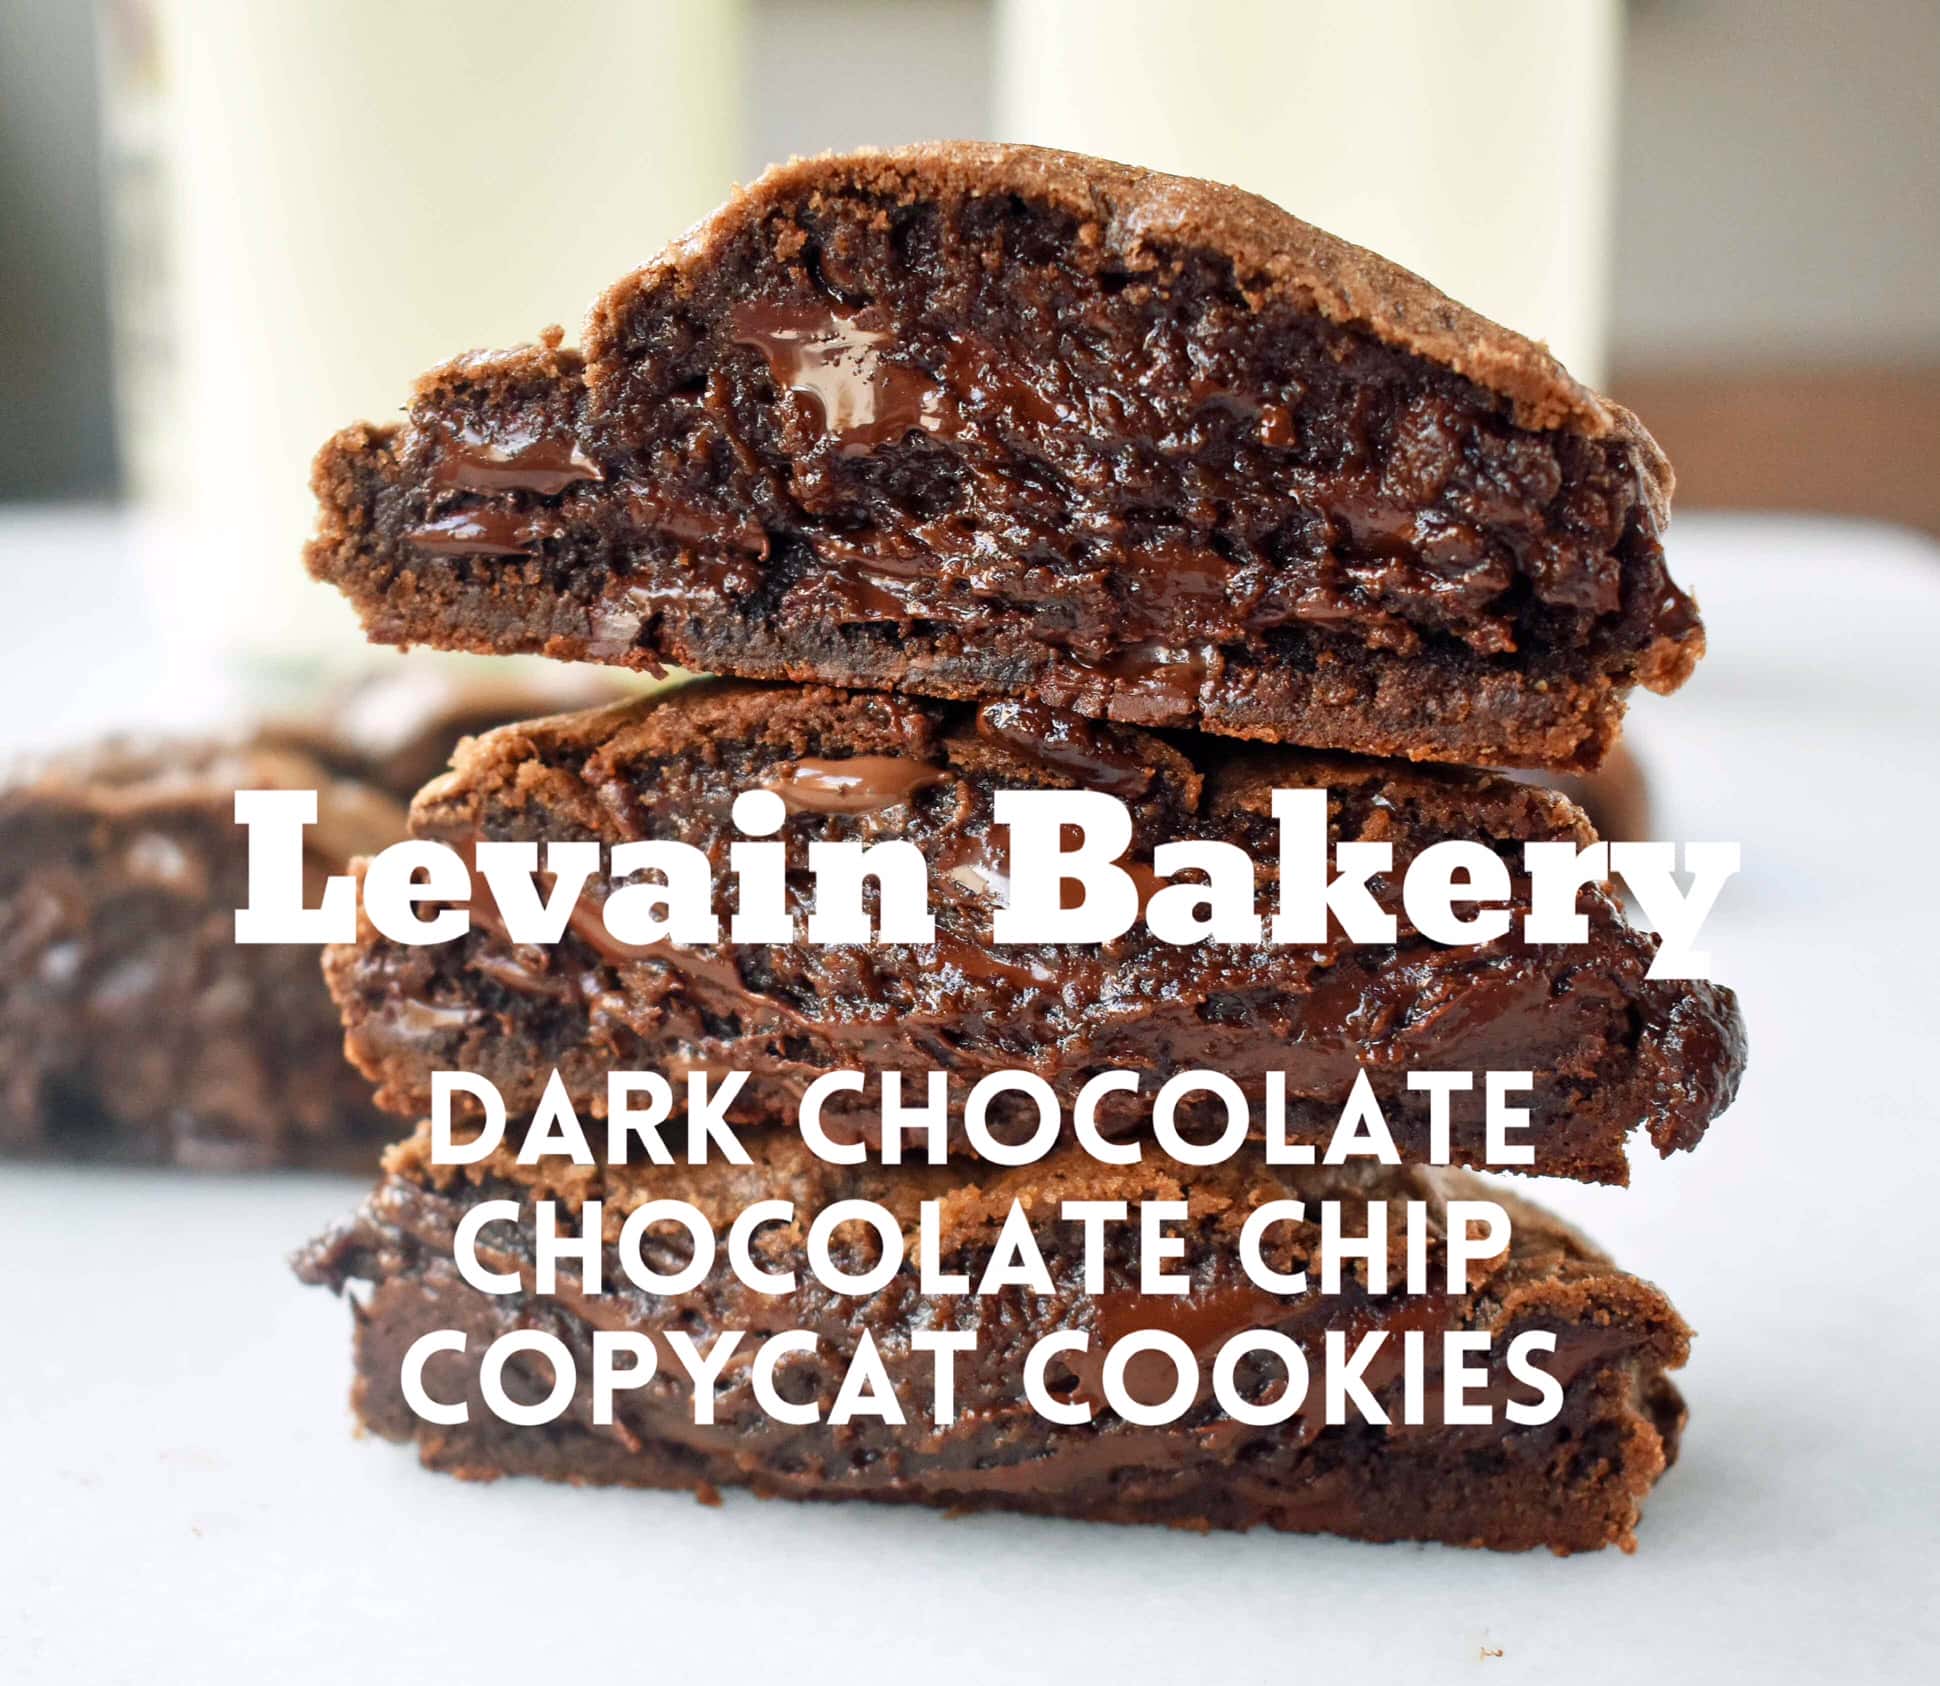 Levain Bakery Dark Chocolate Chocolate Chip Copycat Cookies by Modern Honey. The original copycat Levain Bakery Cookie recipe that has a 5 star rating. The most popular cookie from the famous New York City bakery. www.modernhoney.com